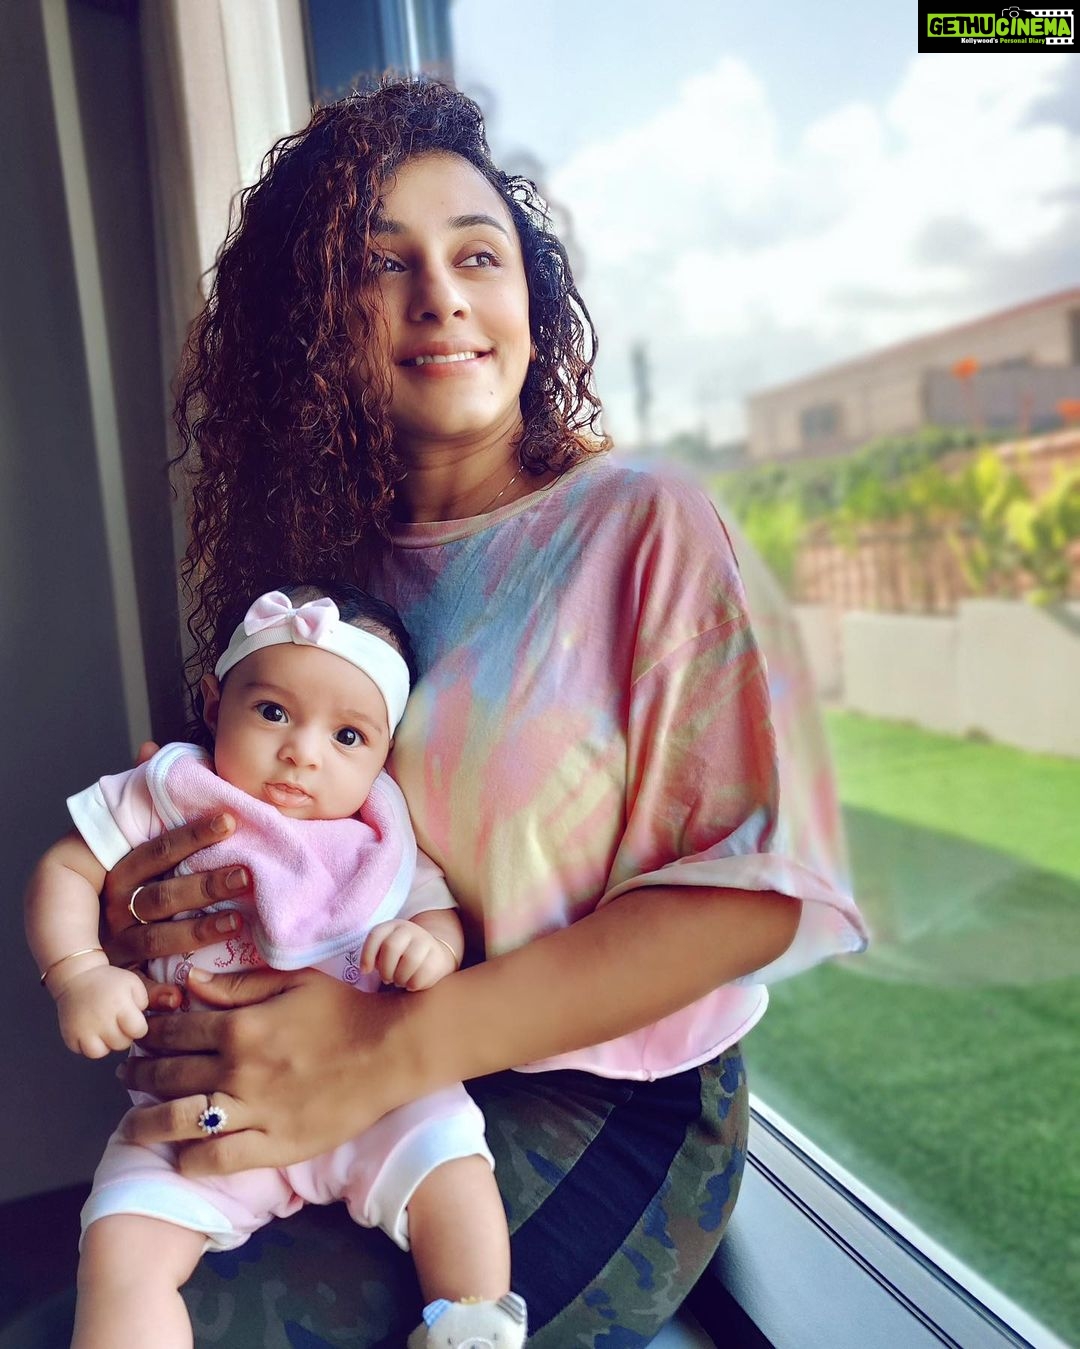 Pearle Maaney - 456.3K Likes - Most Liked Instagram Photos